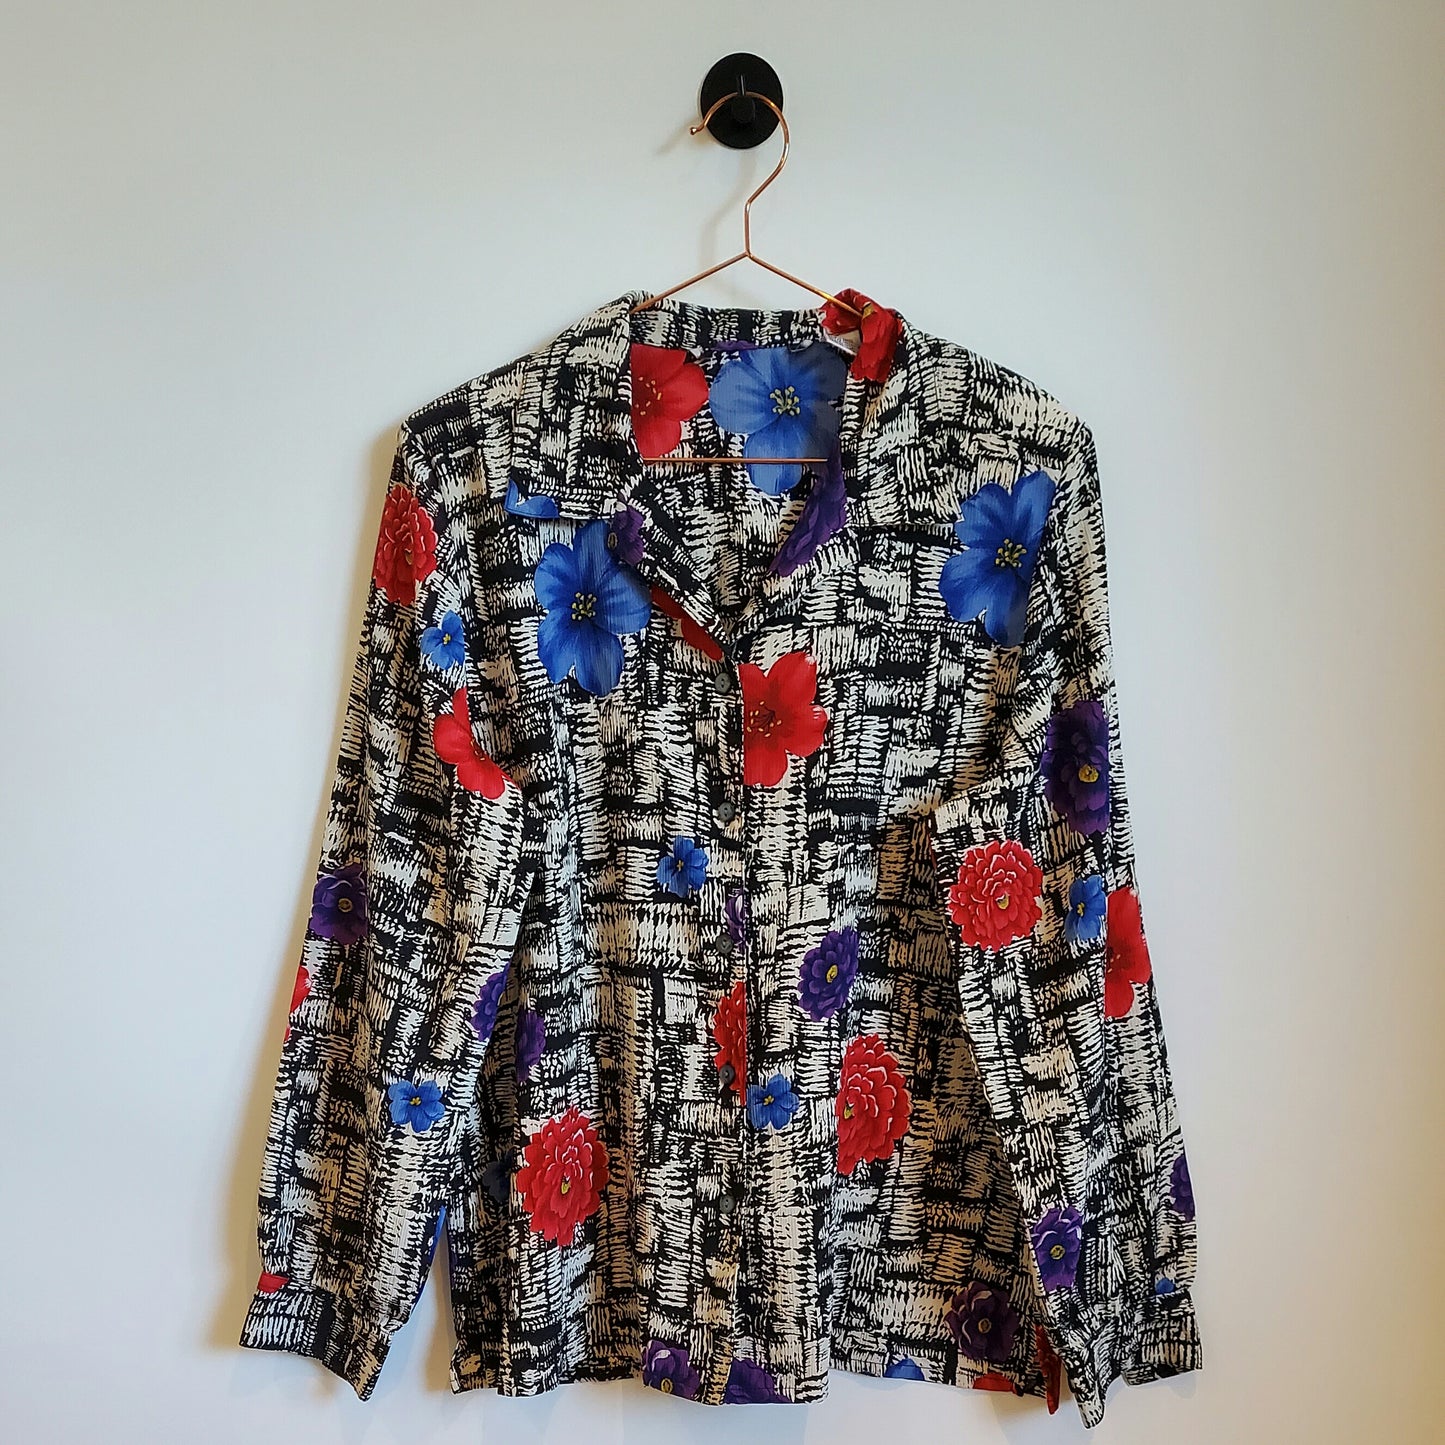 Vintage 80s Floral Blouse Black and White Size 10-12